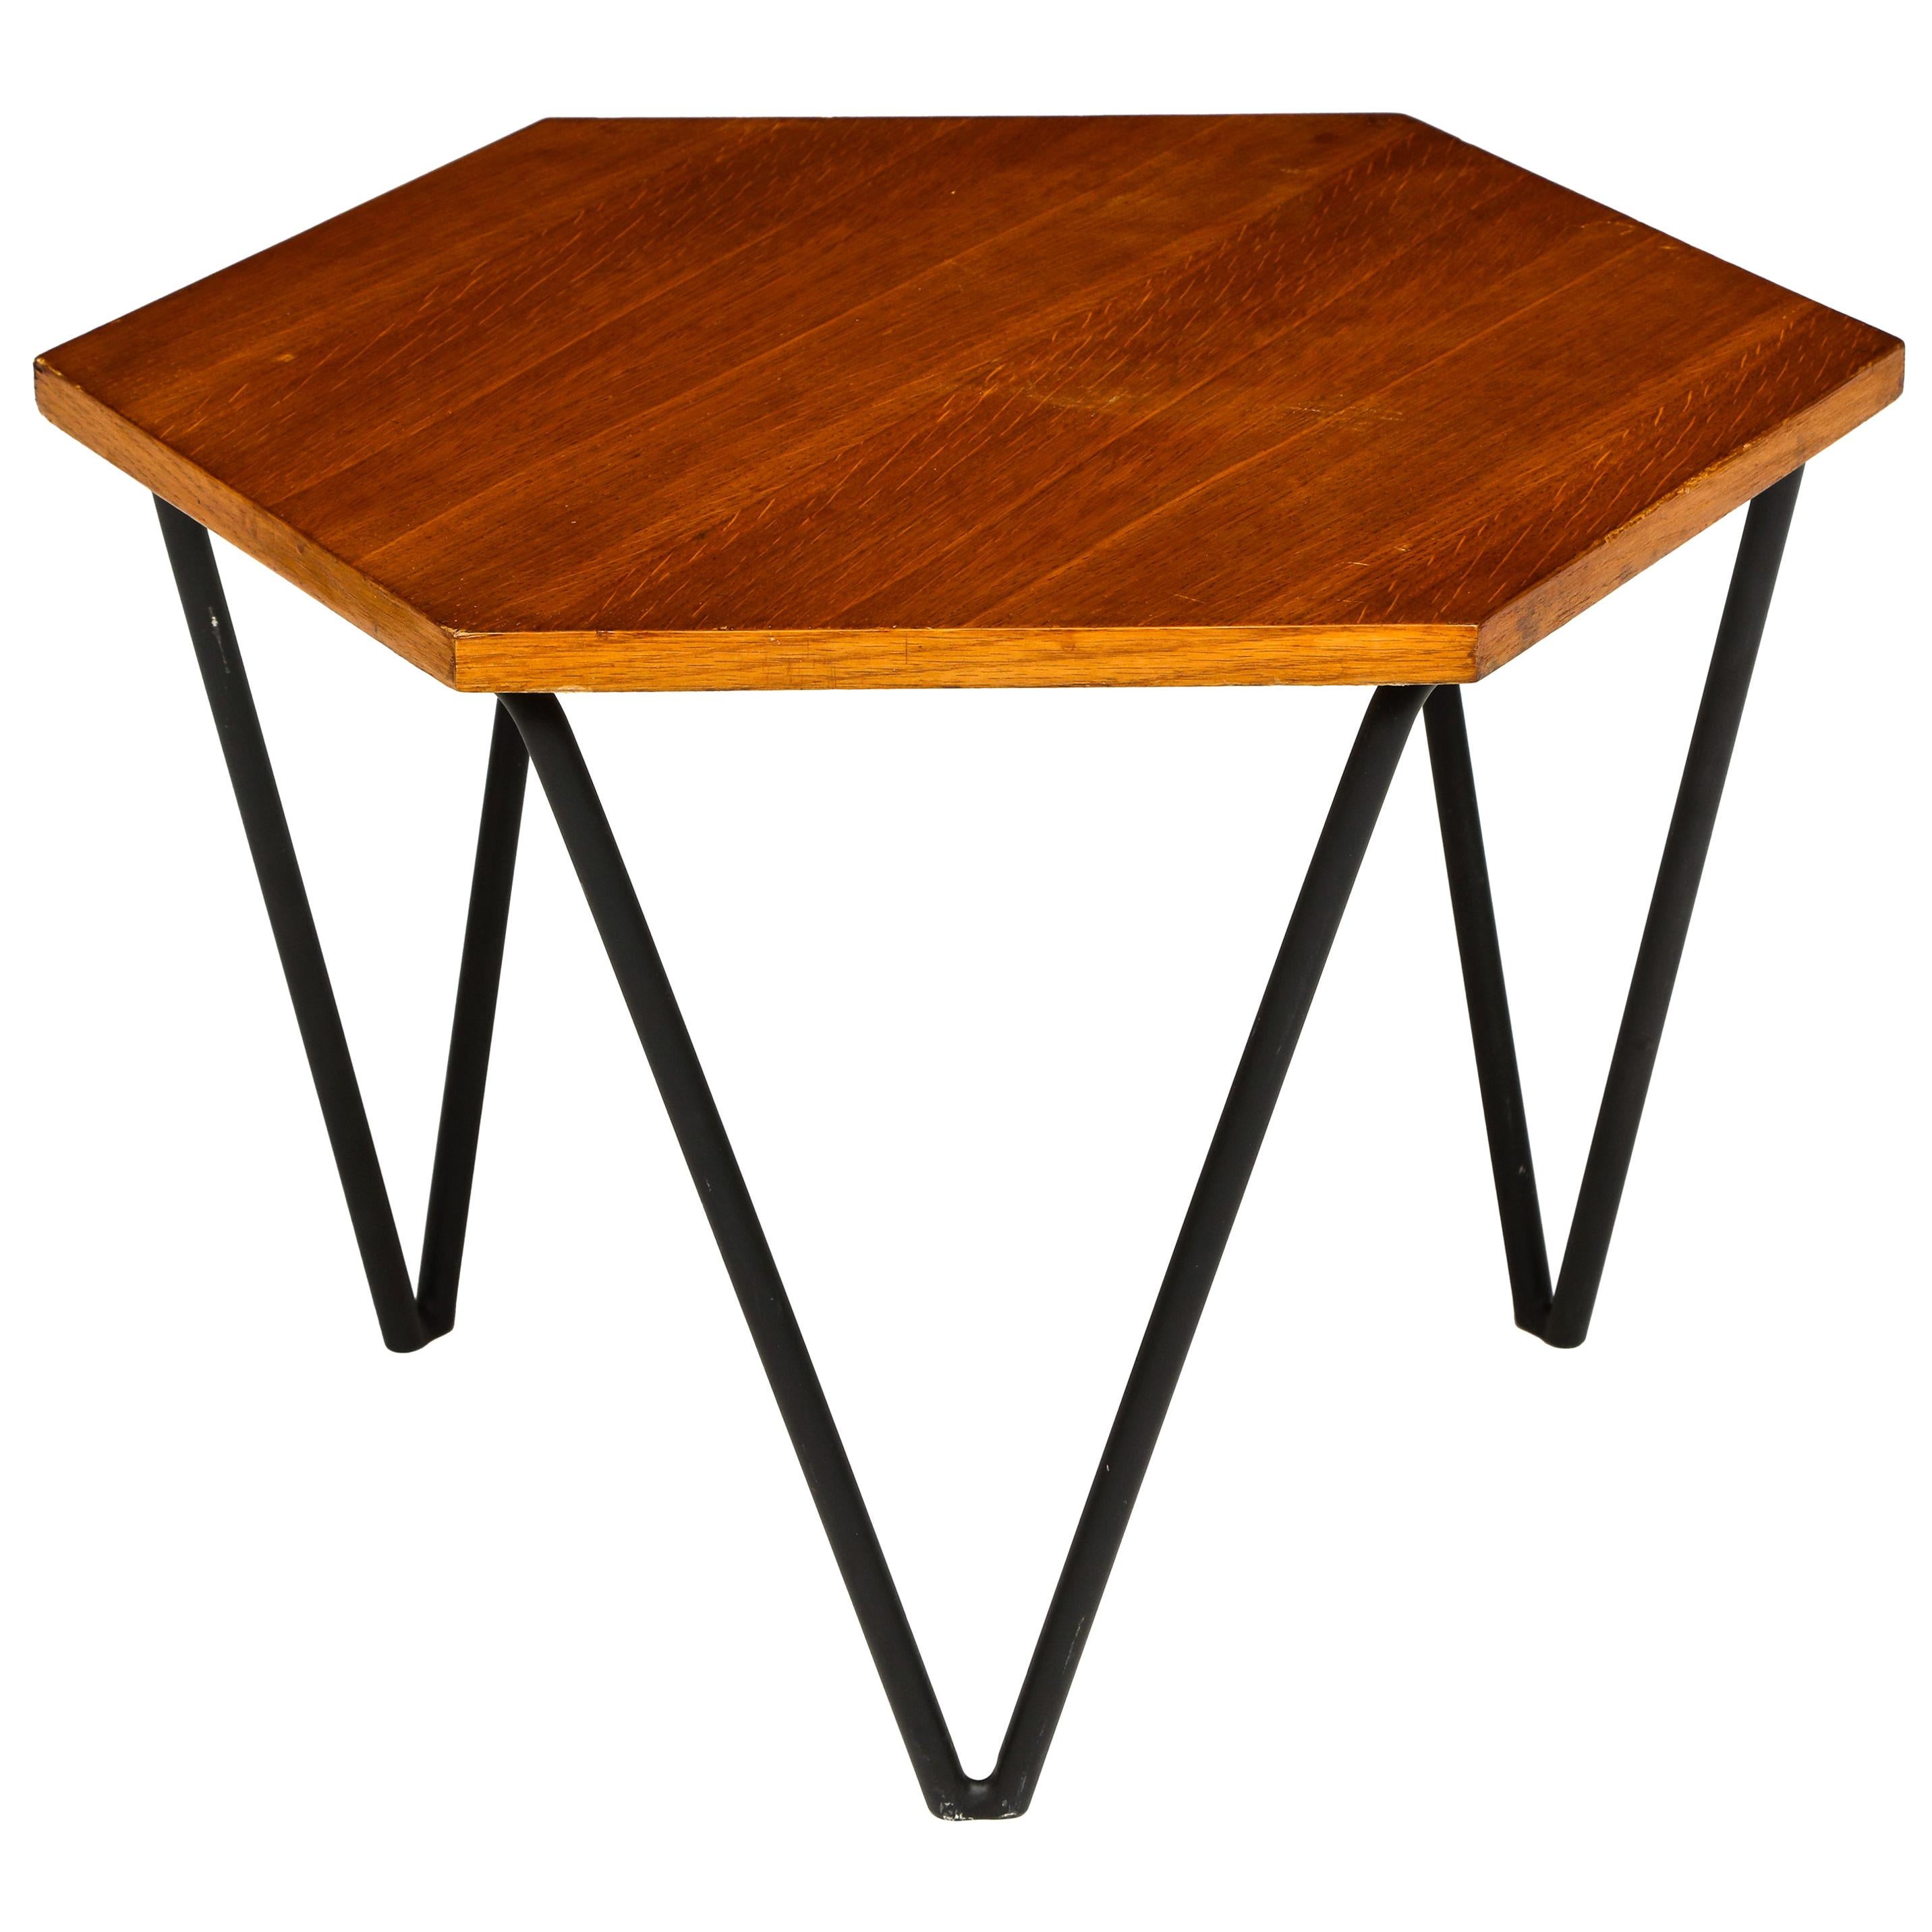 Gio Ponti Side Table by ISA, Wood and Iron, 1950s, Midcentury, Italy